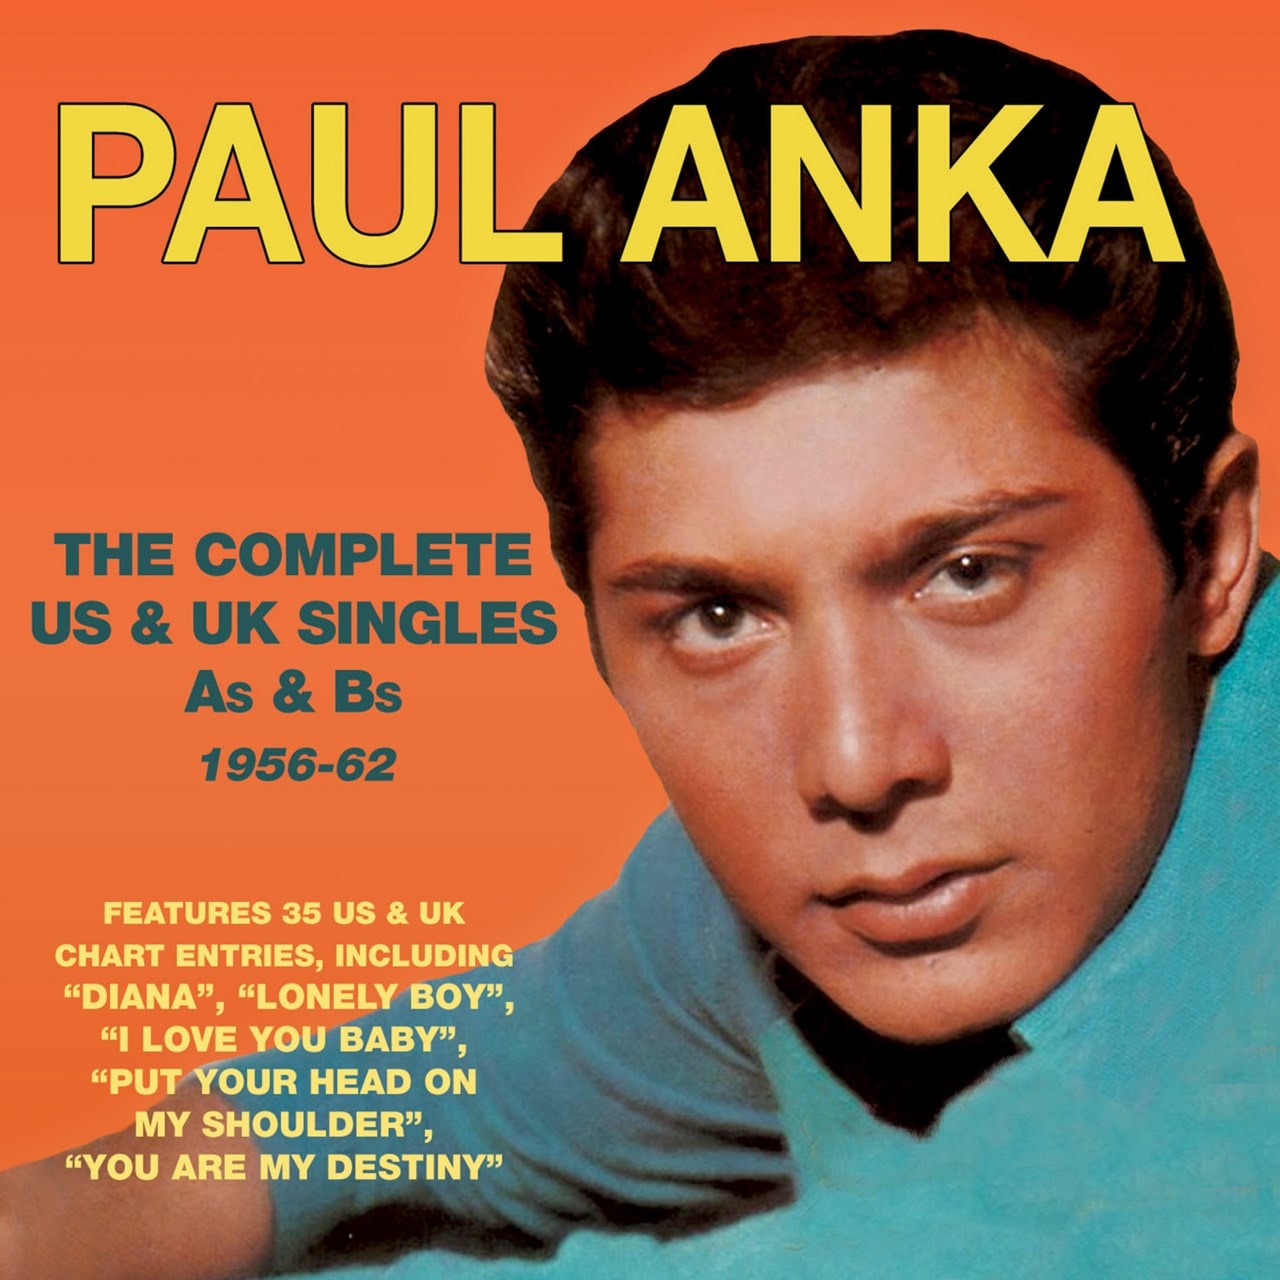 The Complete Us Uk Singles As Bs 1956 62 Cd Album Free Shipping Over Hmv Store